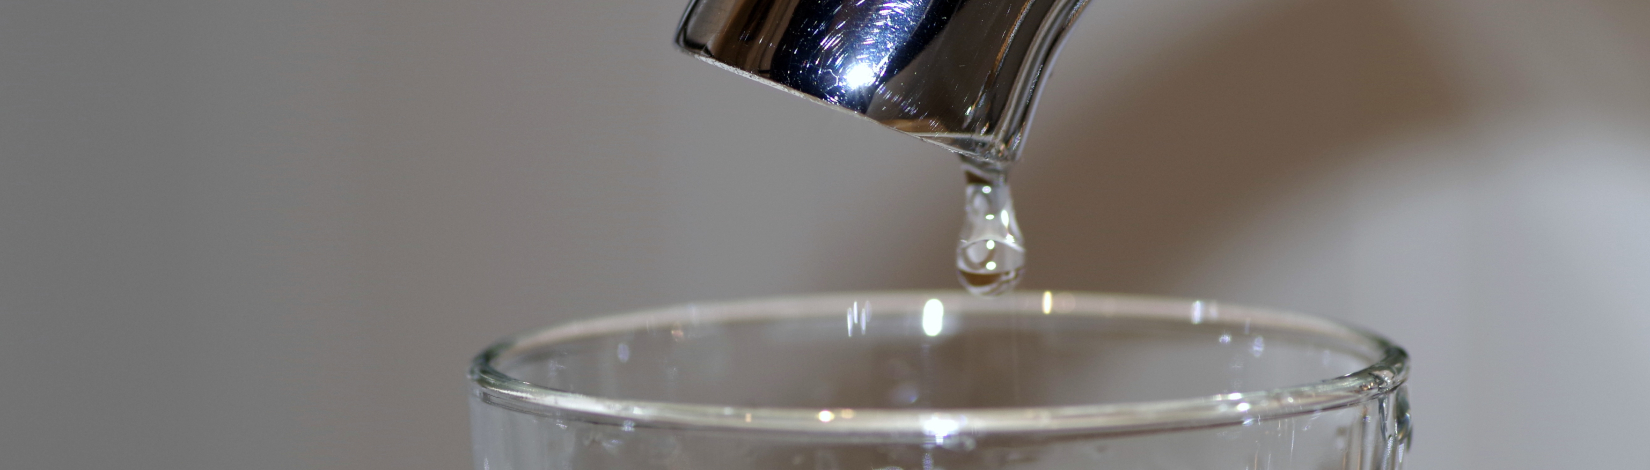 a drop of water falls from a faucet into a waiting glass